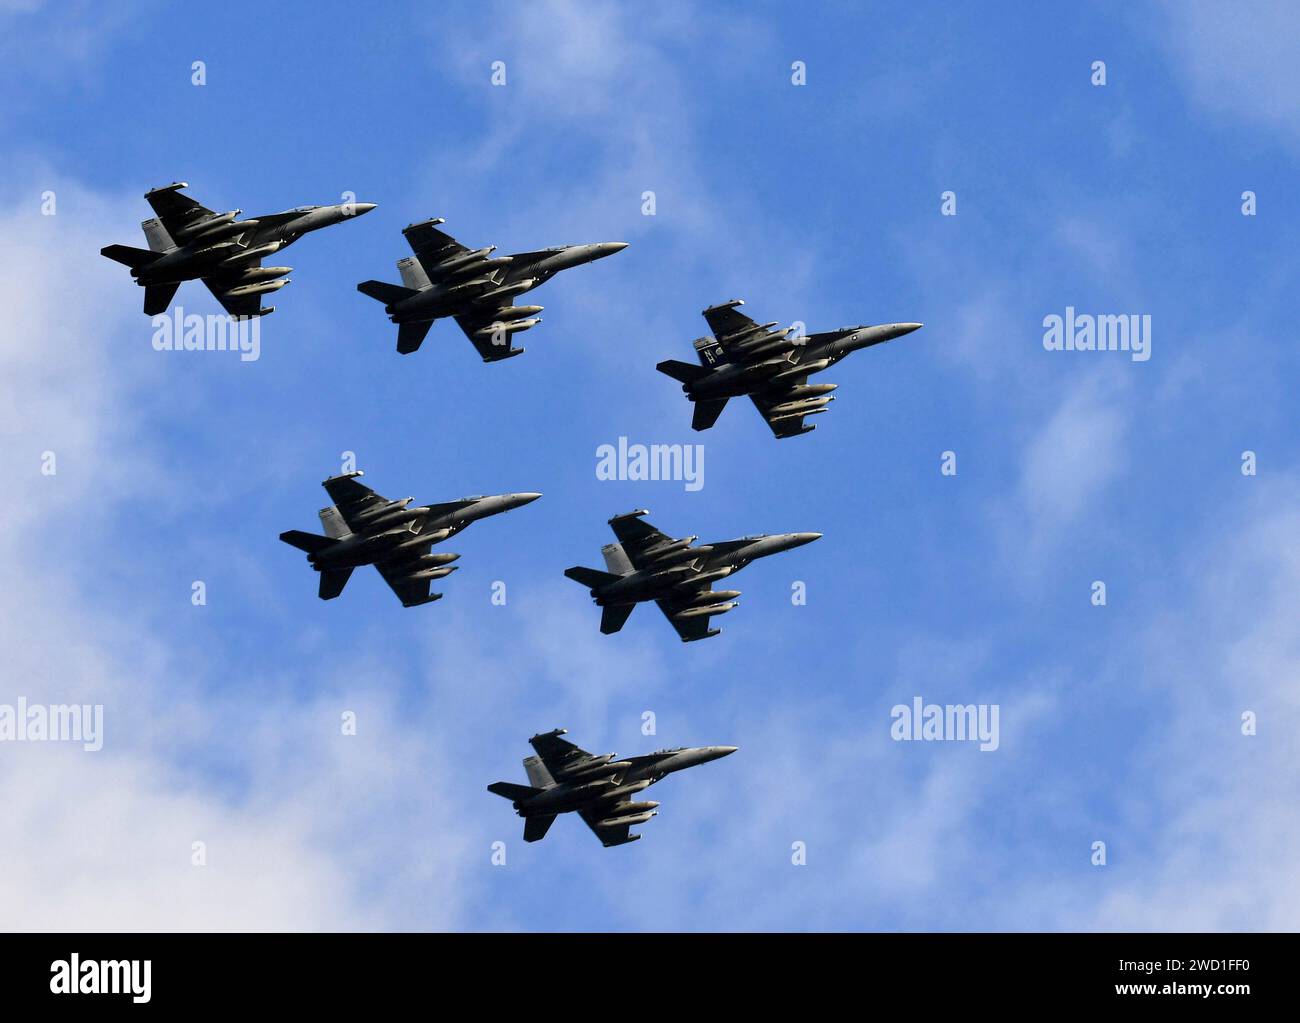 A formation of EA-18G Growler aircraft. Stock Photo